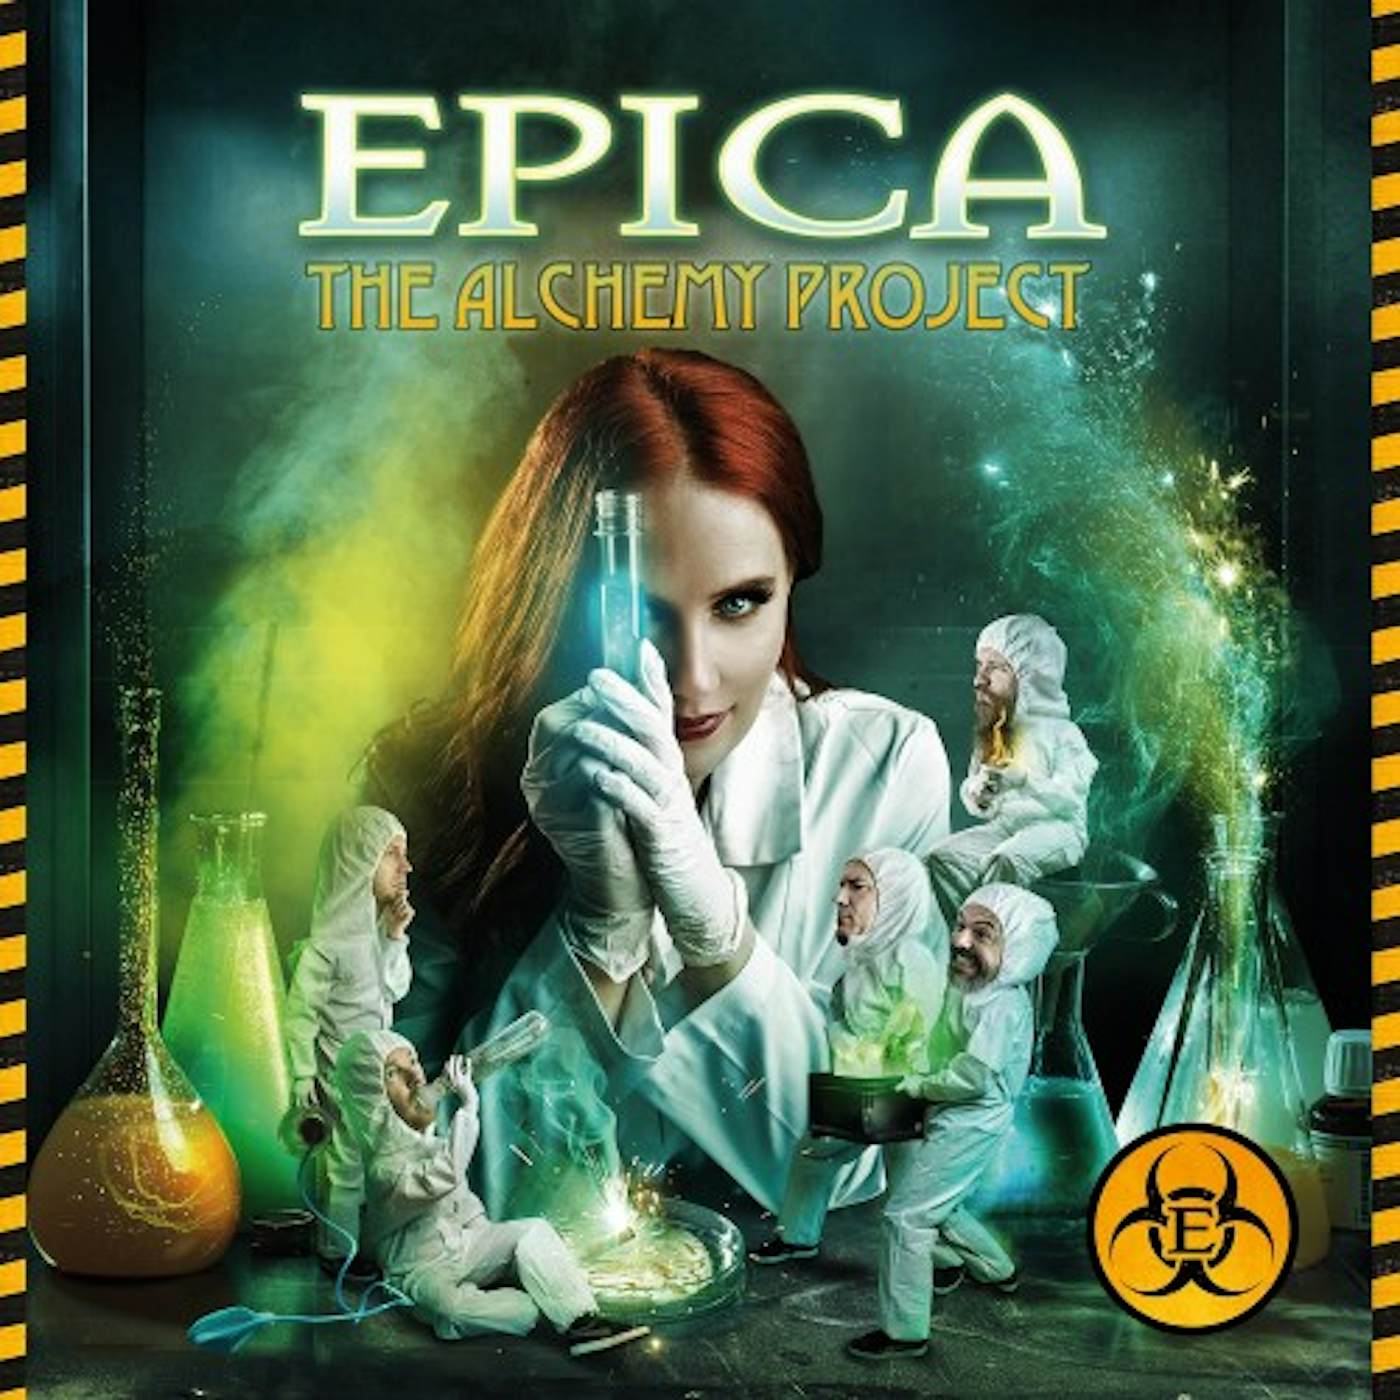 Epica The Alchemy Project Vinyl Record